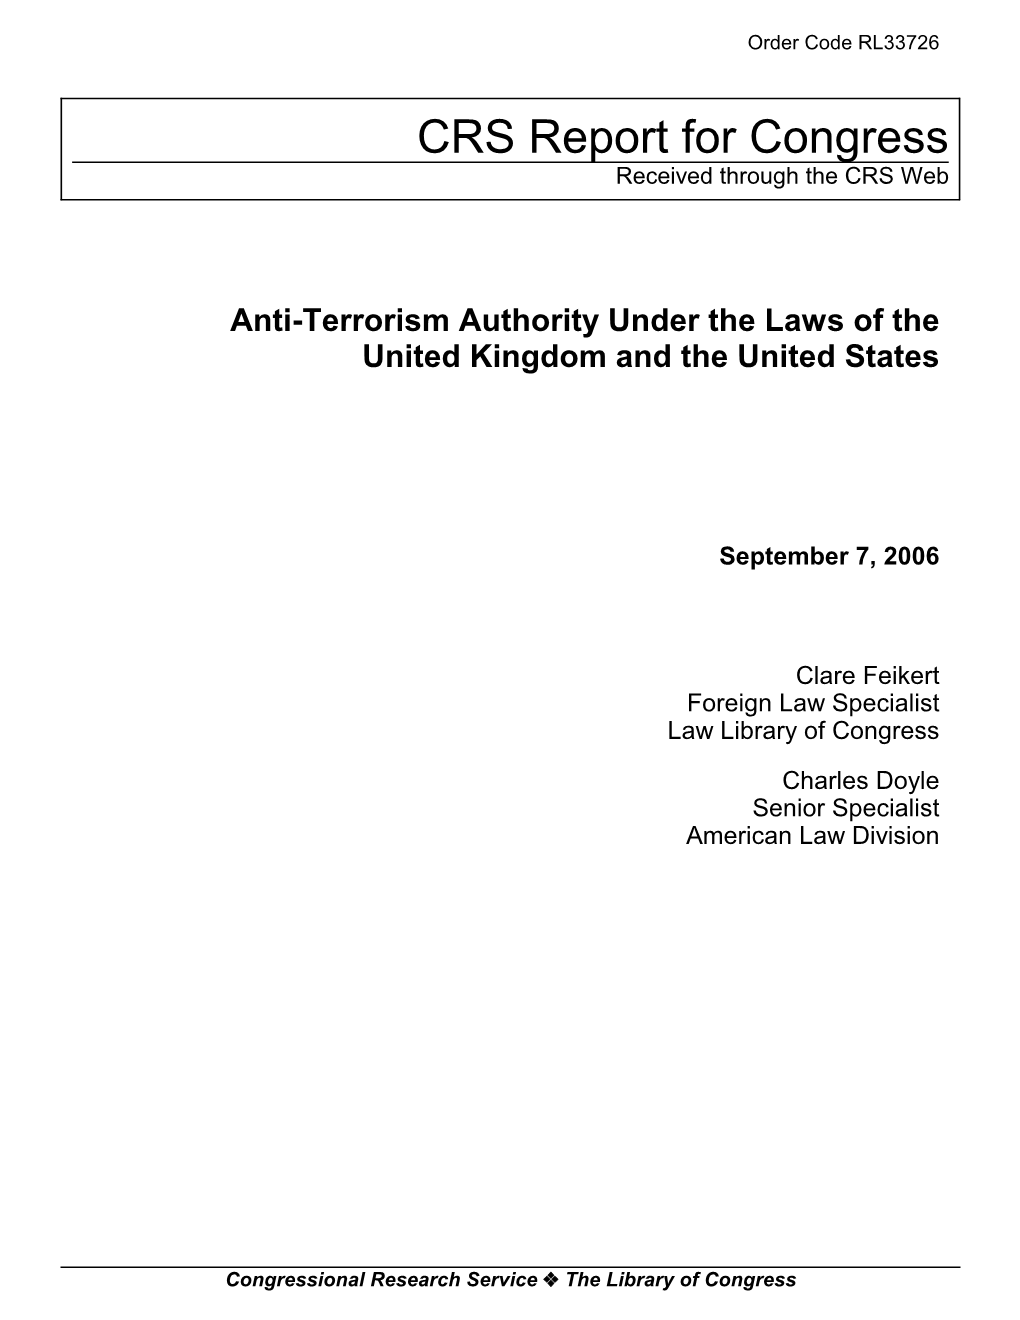 Anti-Terrorism Authority Under the Laws of the United Kingdom and the United States